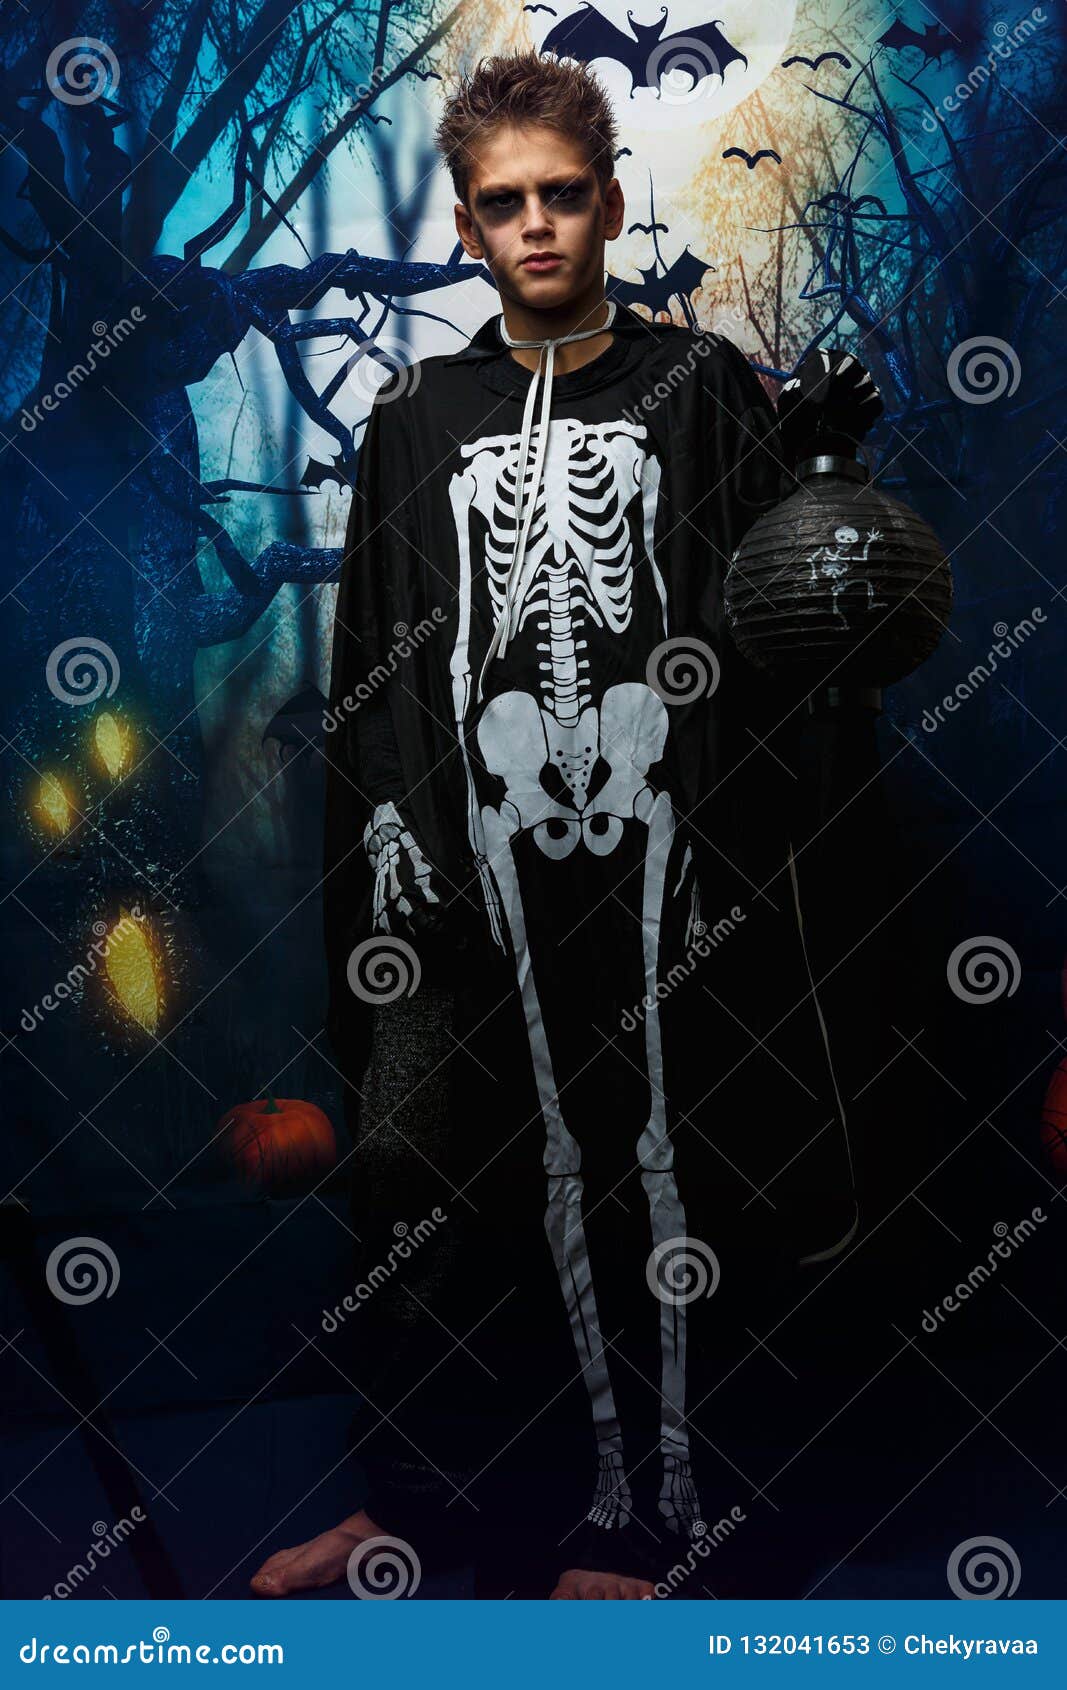 Portrait of Young Boy Skeleton Costume with Makeup. of Holiday Halloween, the Boy in the Image, the Skeleton Theme Stock Image - Image of celebration, tradition: 132041653